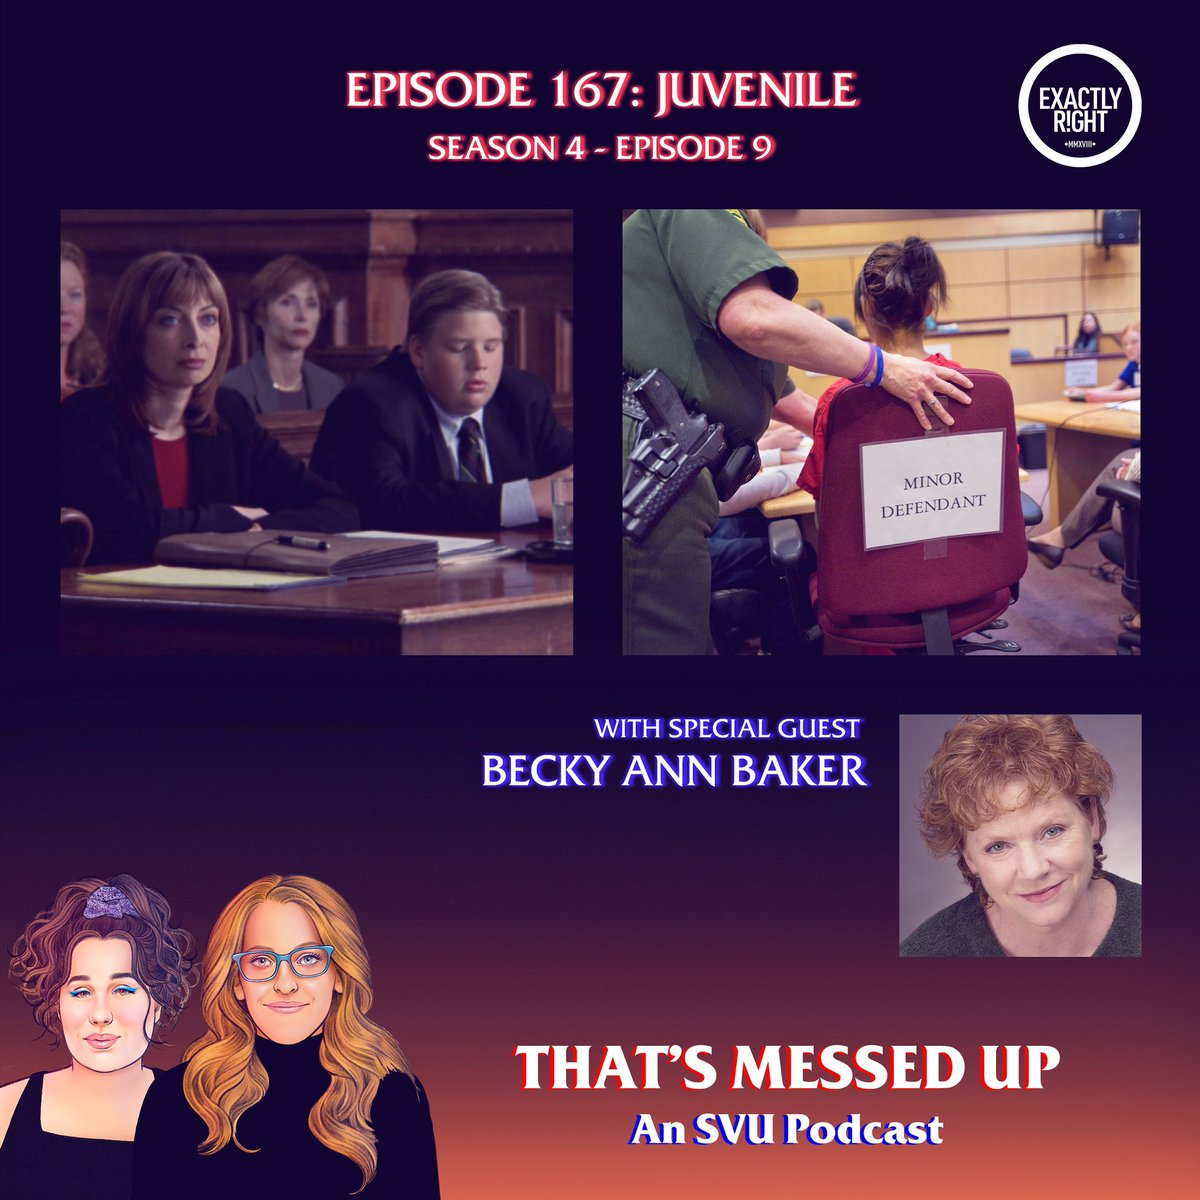 NEW EPISODE - Episode 167 “Juvenile” is up on @exactlyright! A dark episode with some major talent! And we were thrilled and honored to talk with the legendary Becky Ann Baker! Listen on @applepodcasts podcasts.apple.com/us/podcast/tha… or wherever you pod! #svu #dundun #lawandordersvu